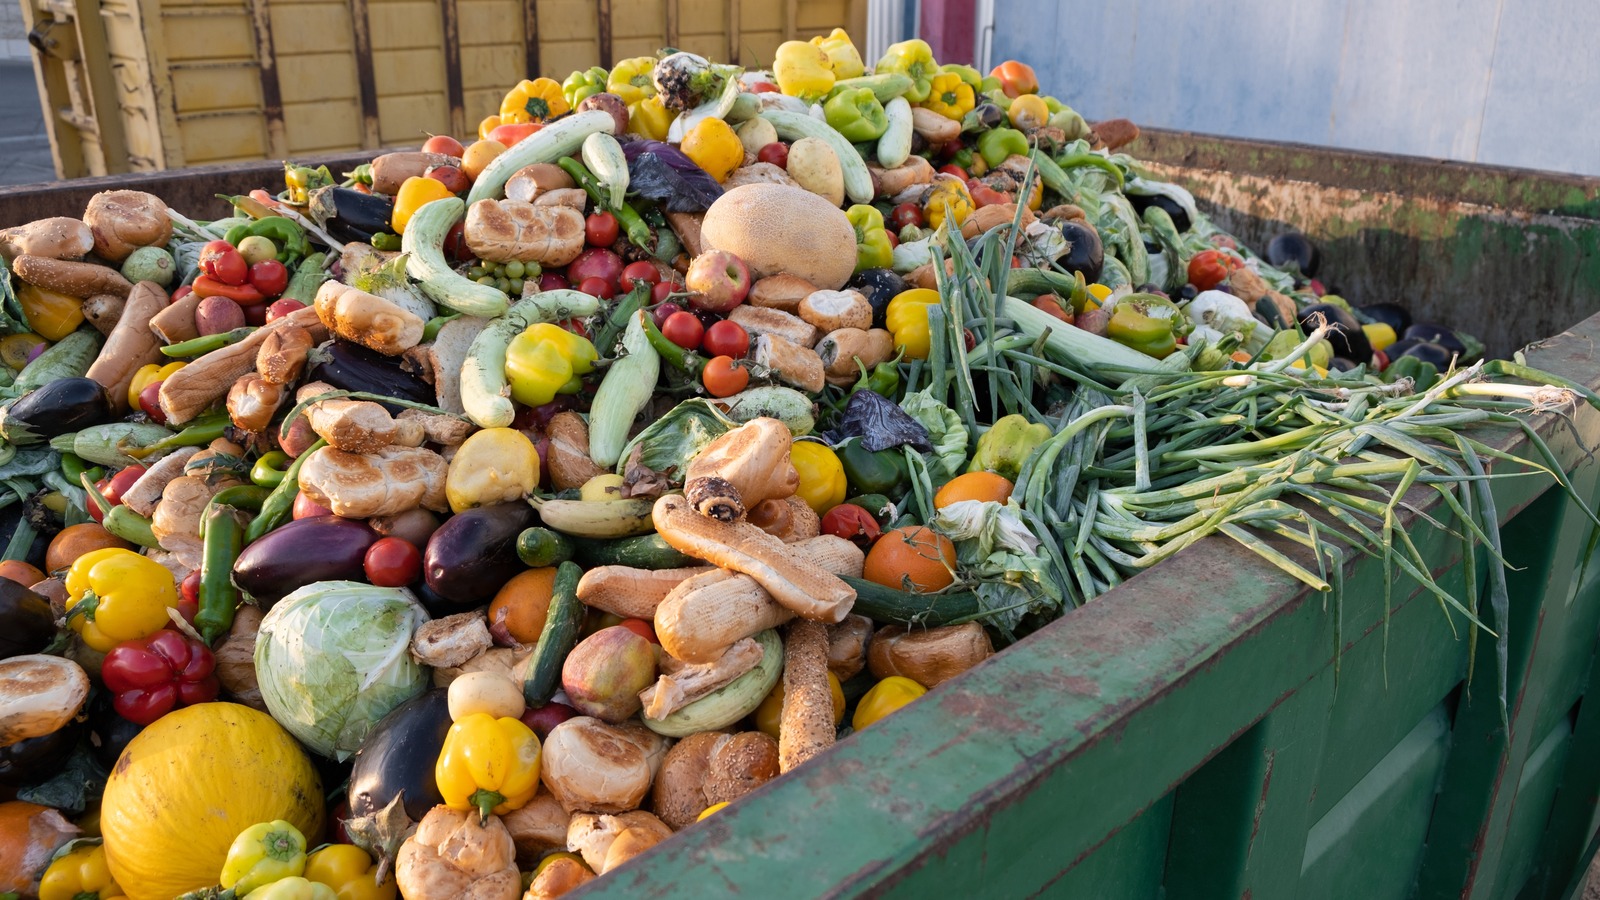 6 Top-notch Food Waste Apps to Save Money and the Environment